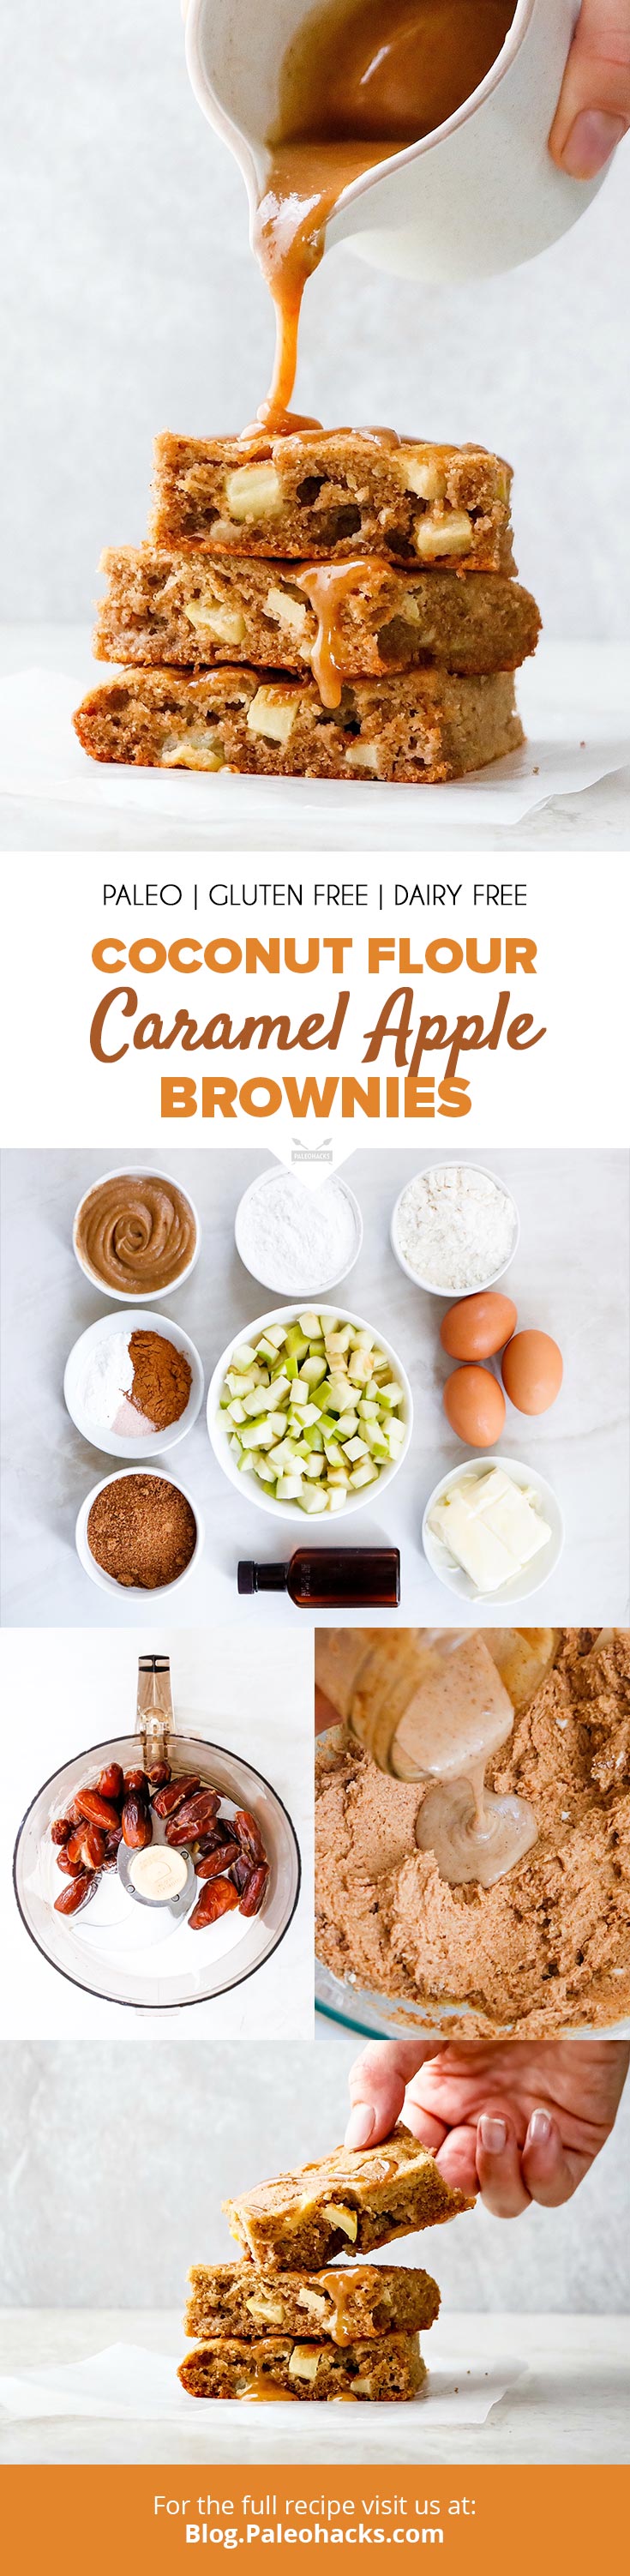 Bake up these rich coconut flour brownies filled with chopped apples, cinnamon, and a dairy-free caramel sauce. Let the indulging begin!